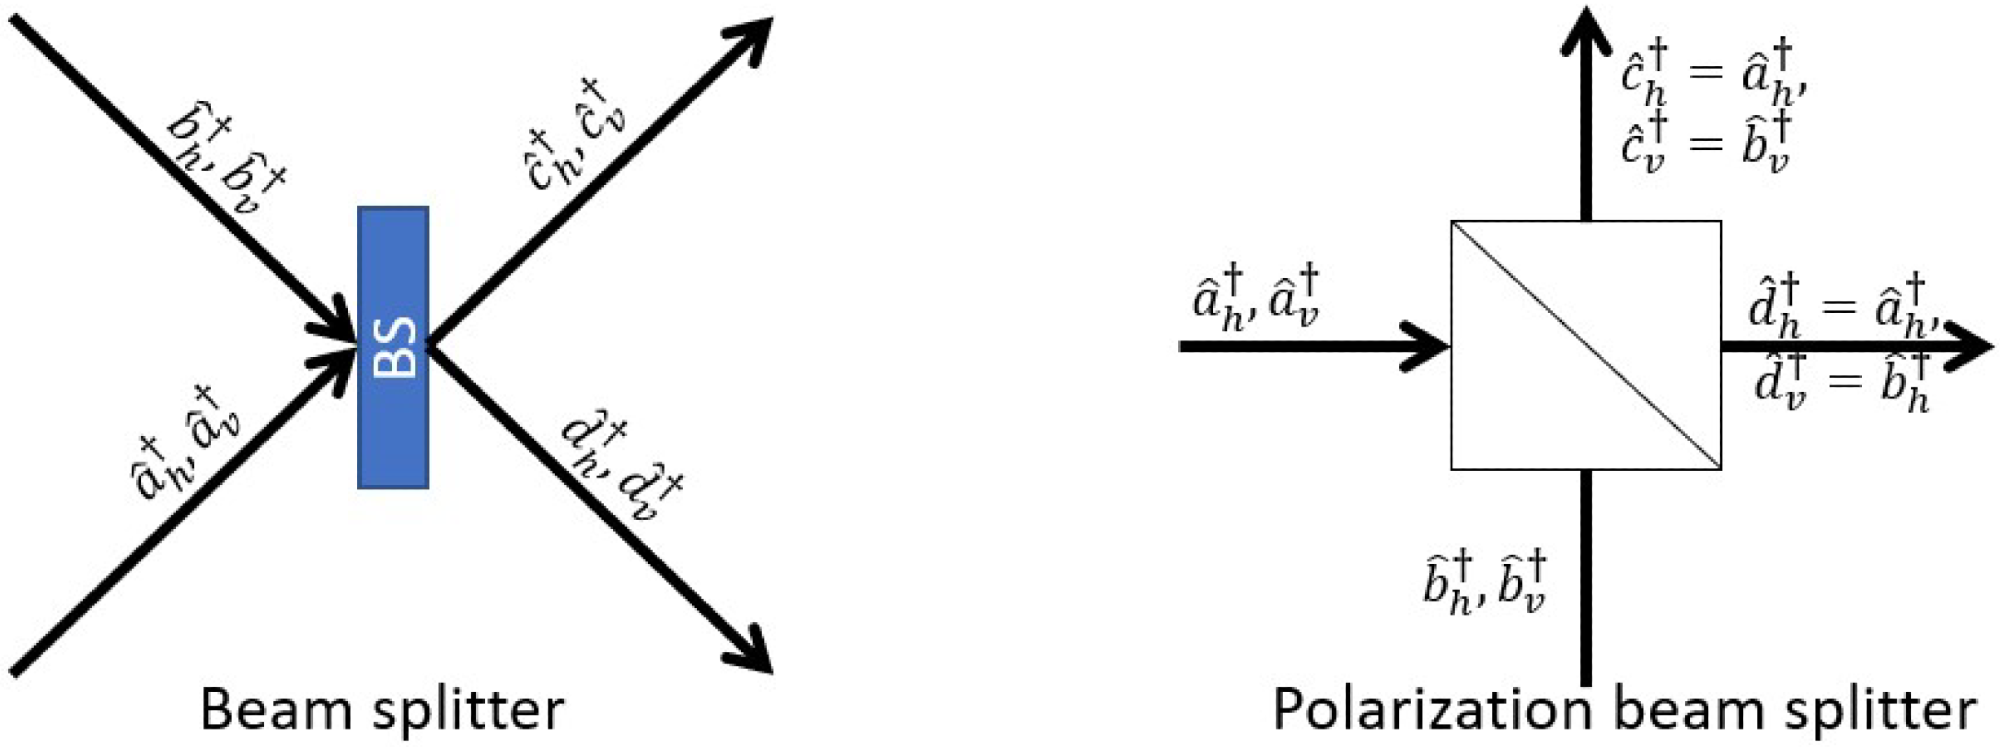 Diagram of (left) the beam splitter and (right) the polarization beam splitter, acting on the two-rail states with polarization. The equations of (polarization) beam splitters comes from ([20], Equation (6) p. 137 and Equation (7) and p. 138).